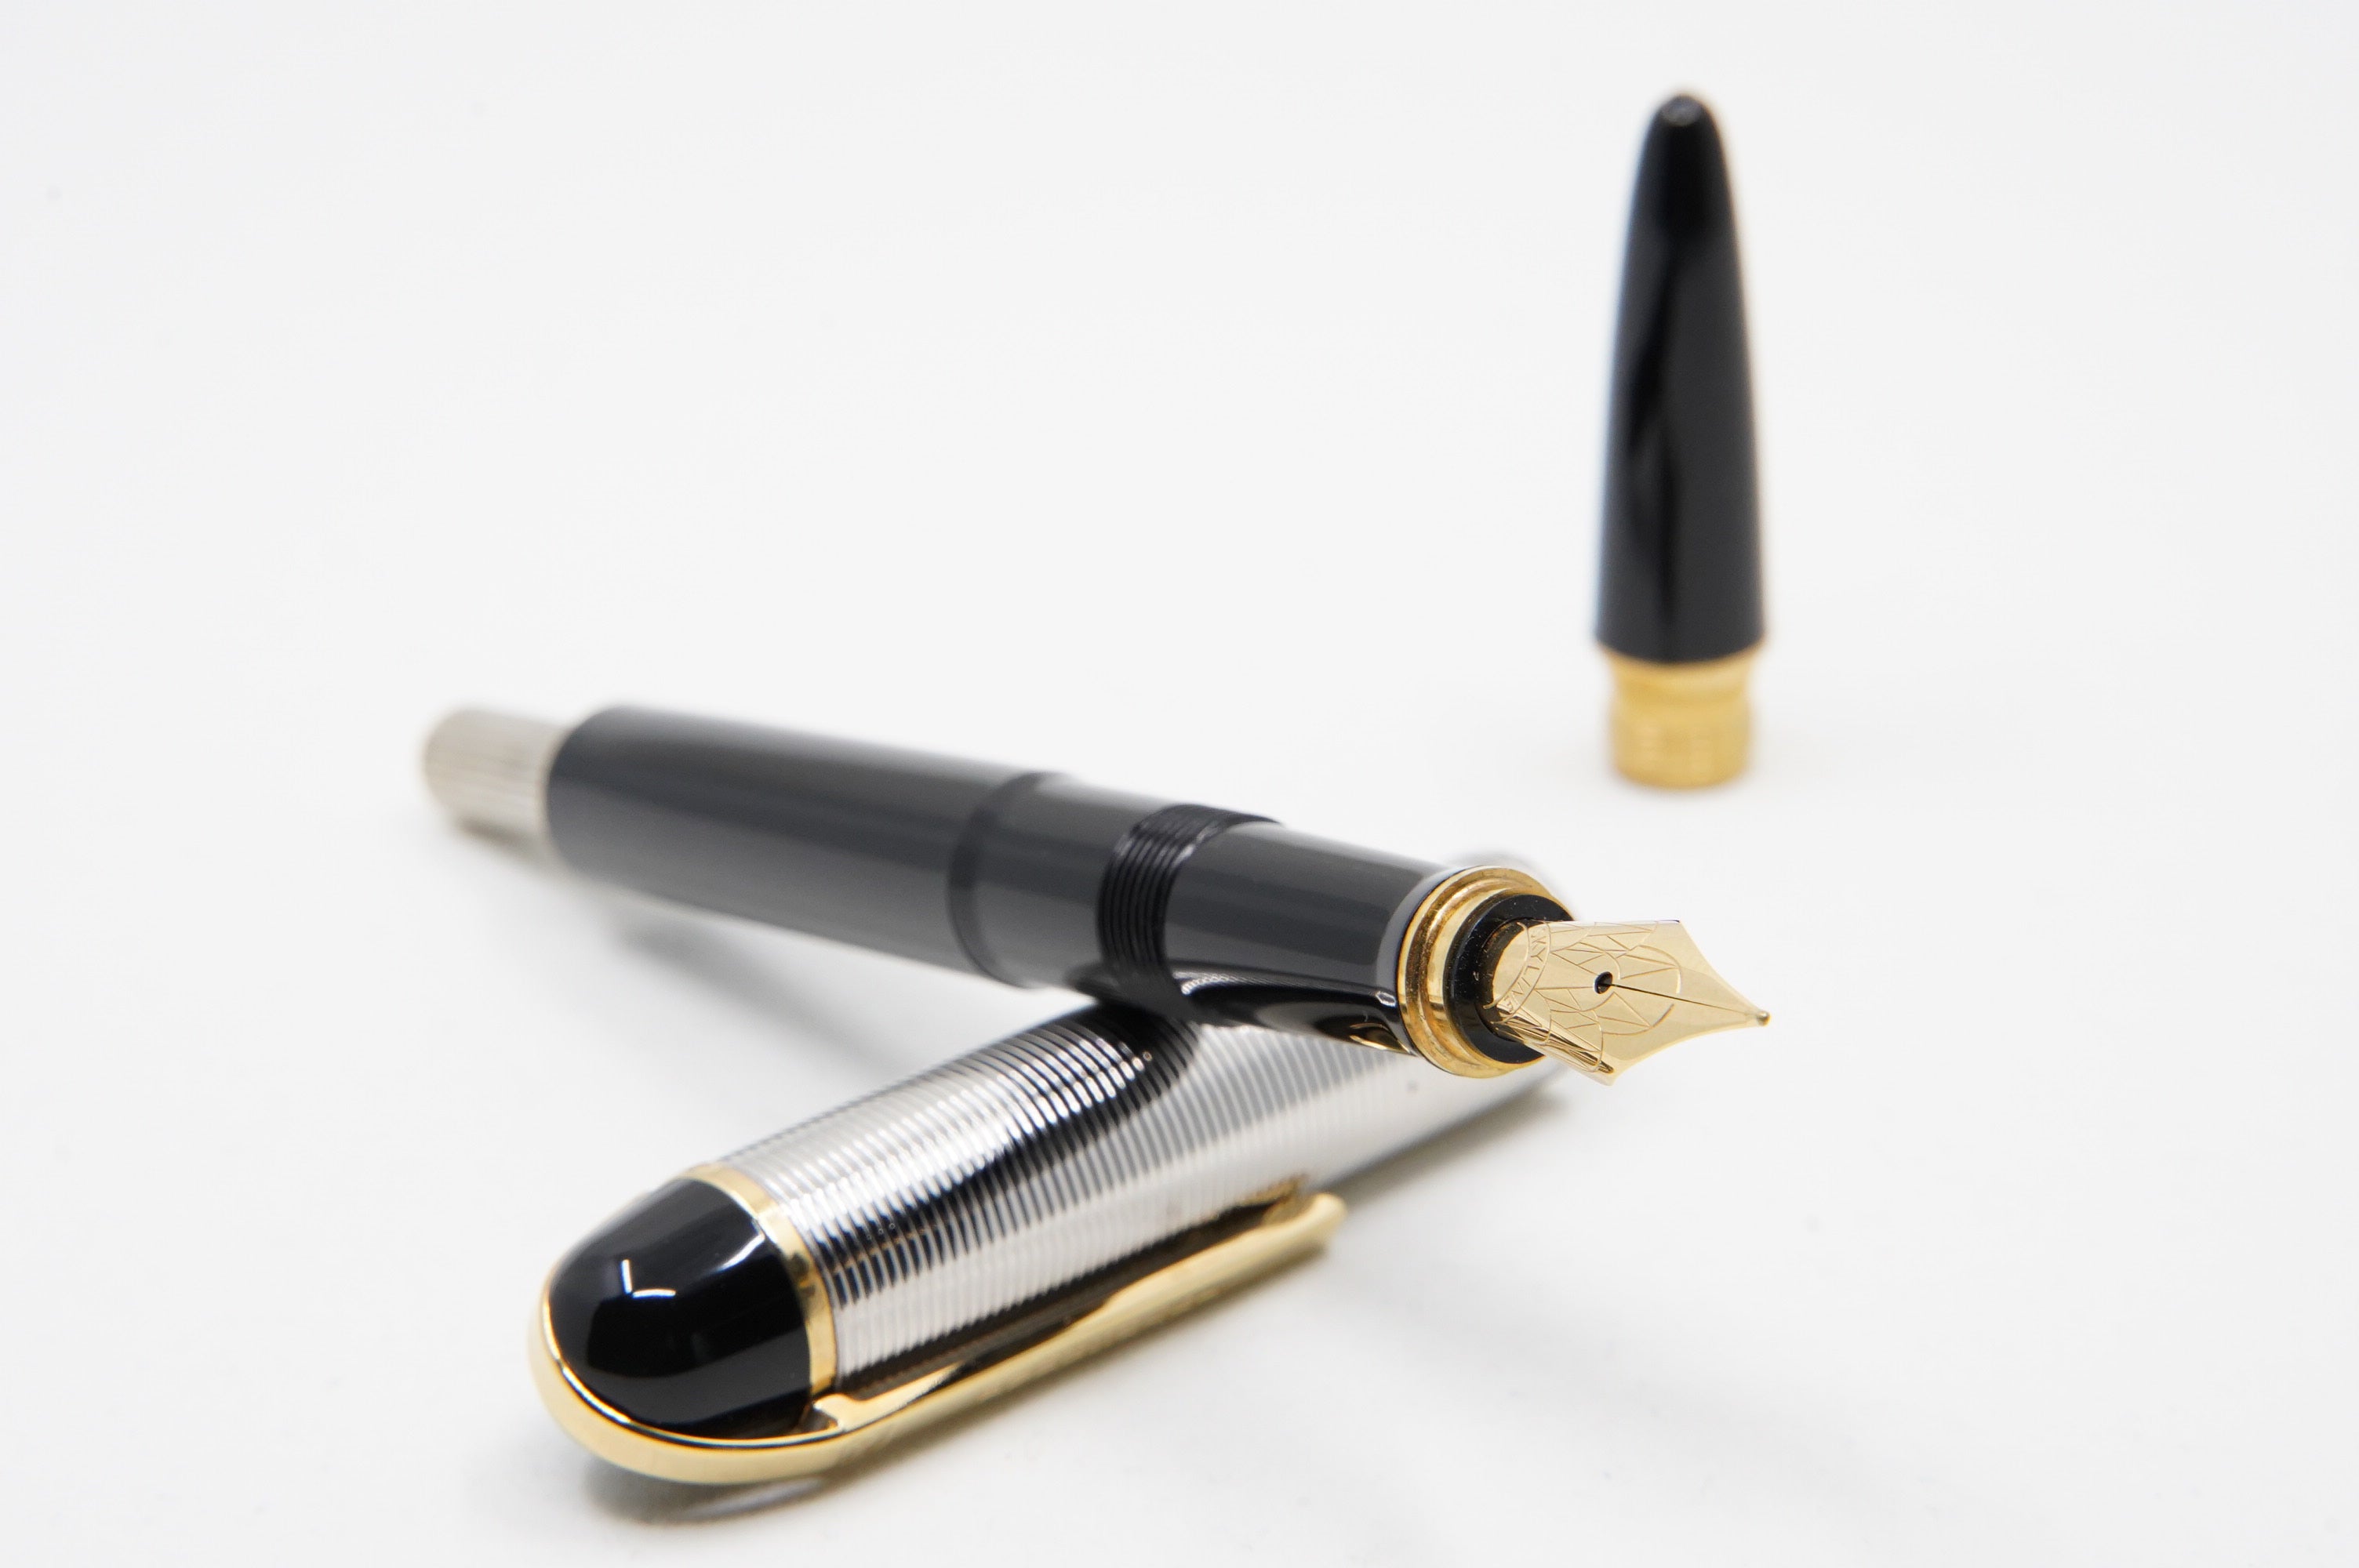 Wahl Eversharp Skyline FP Black - The iconic SKYLINE created by Henry Dreyfus in 1939